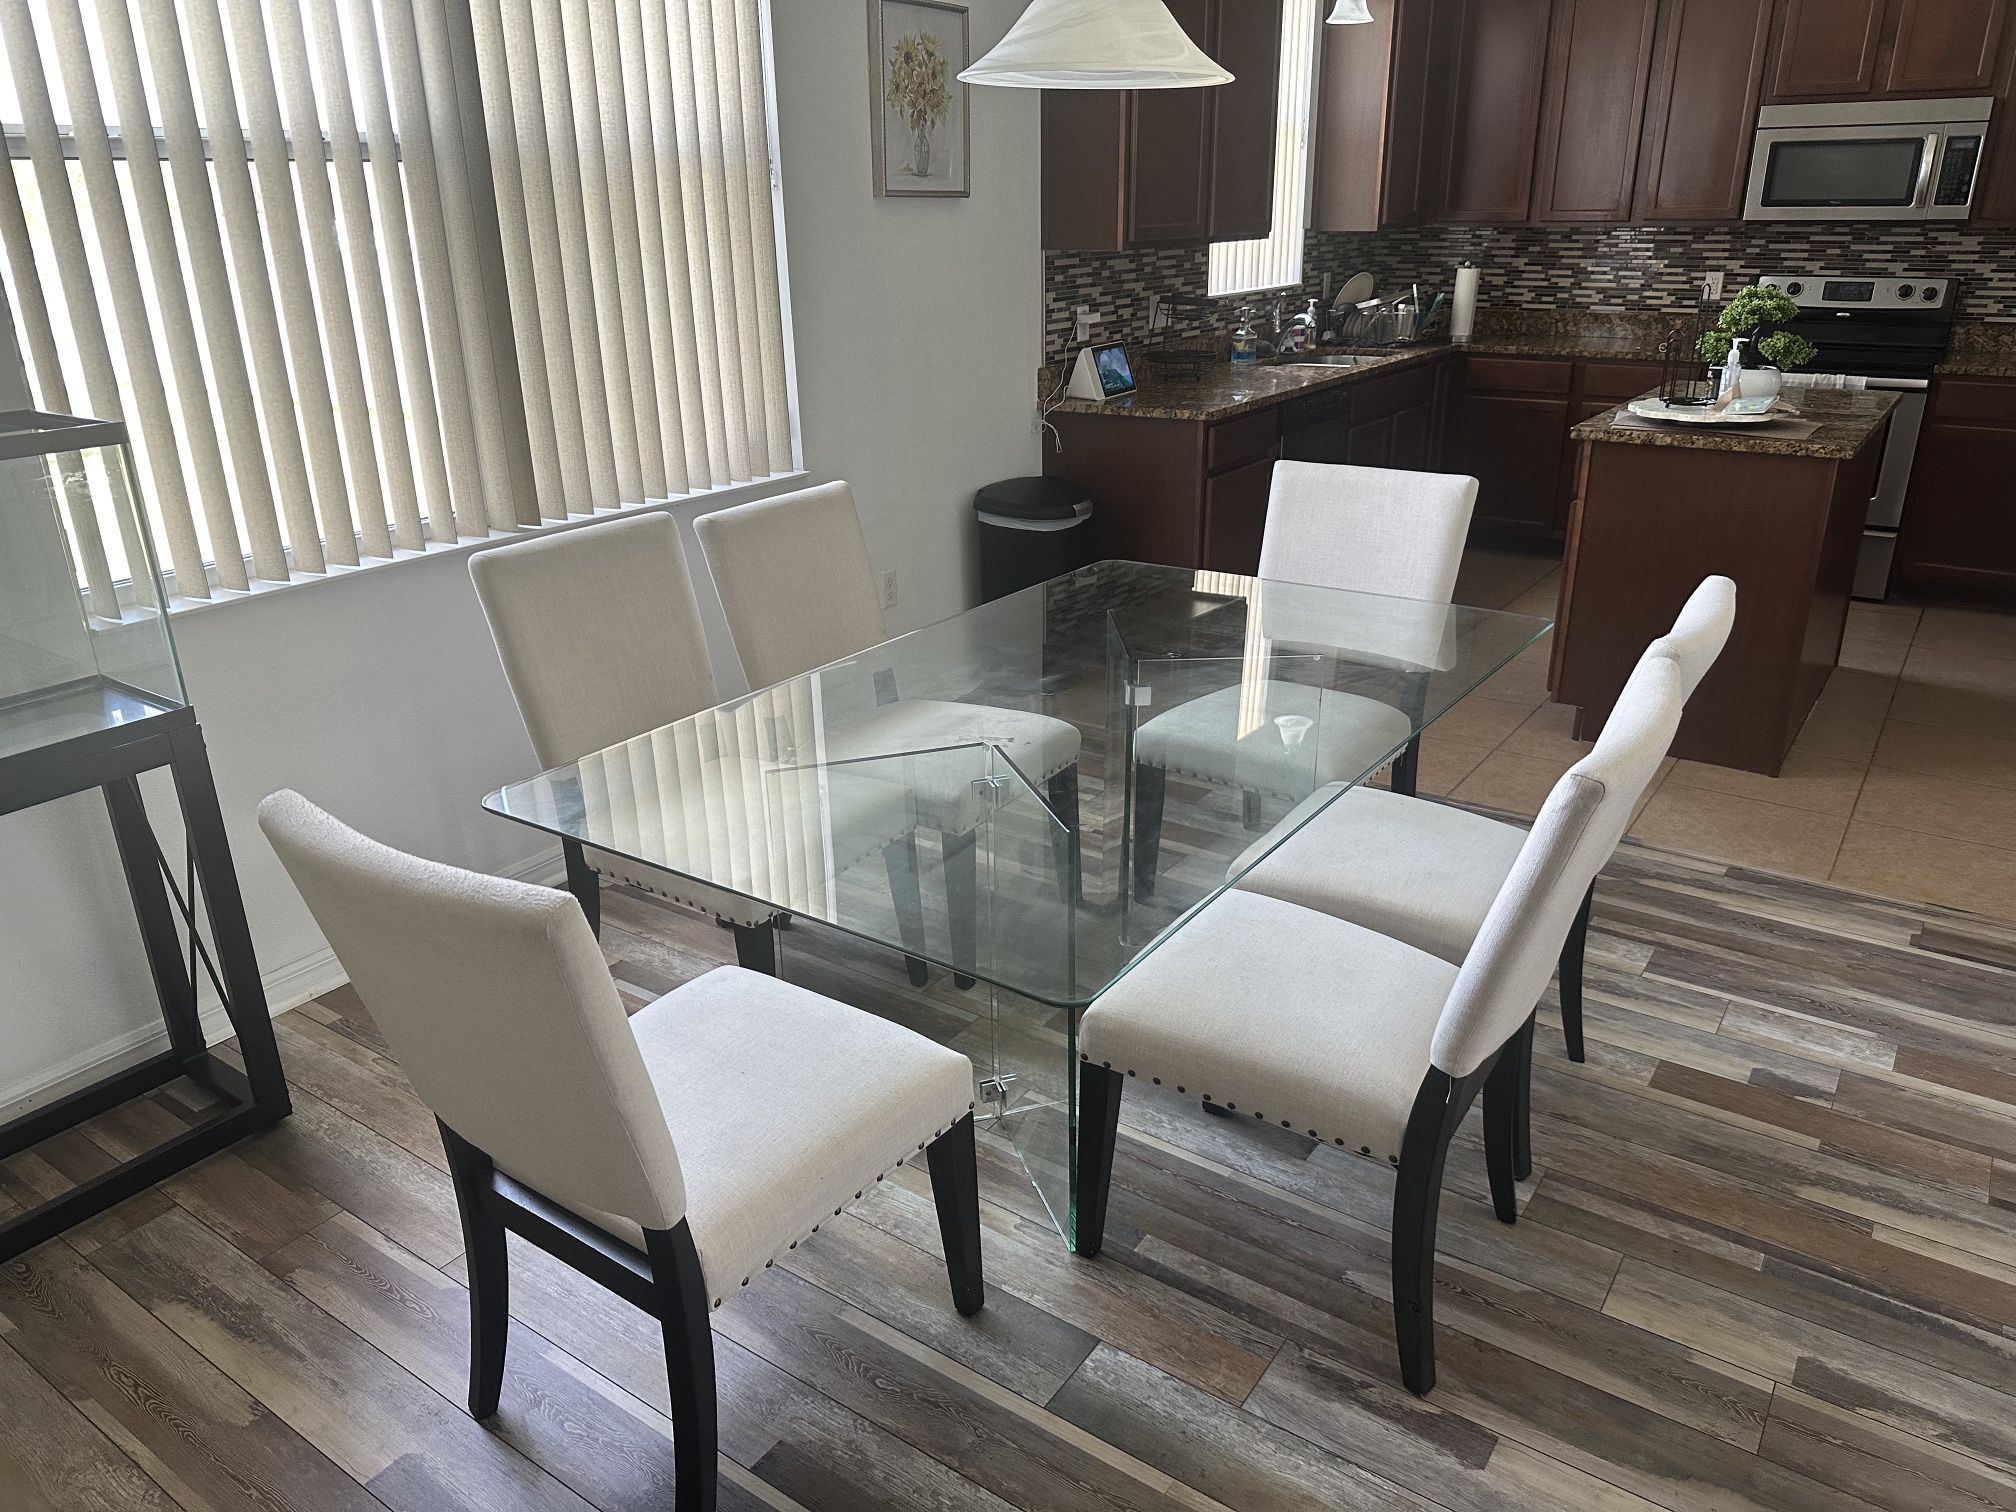 Glass Dining Room Table With Chairs